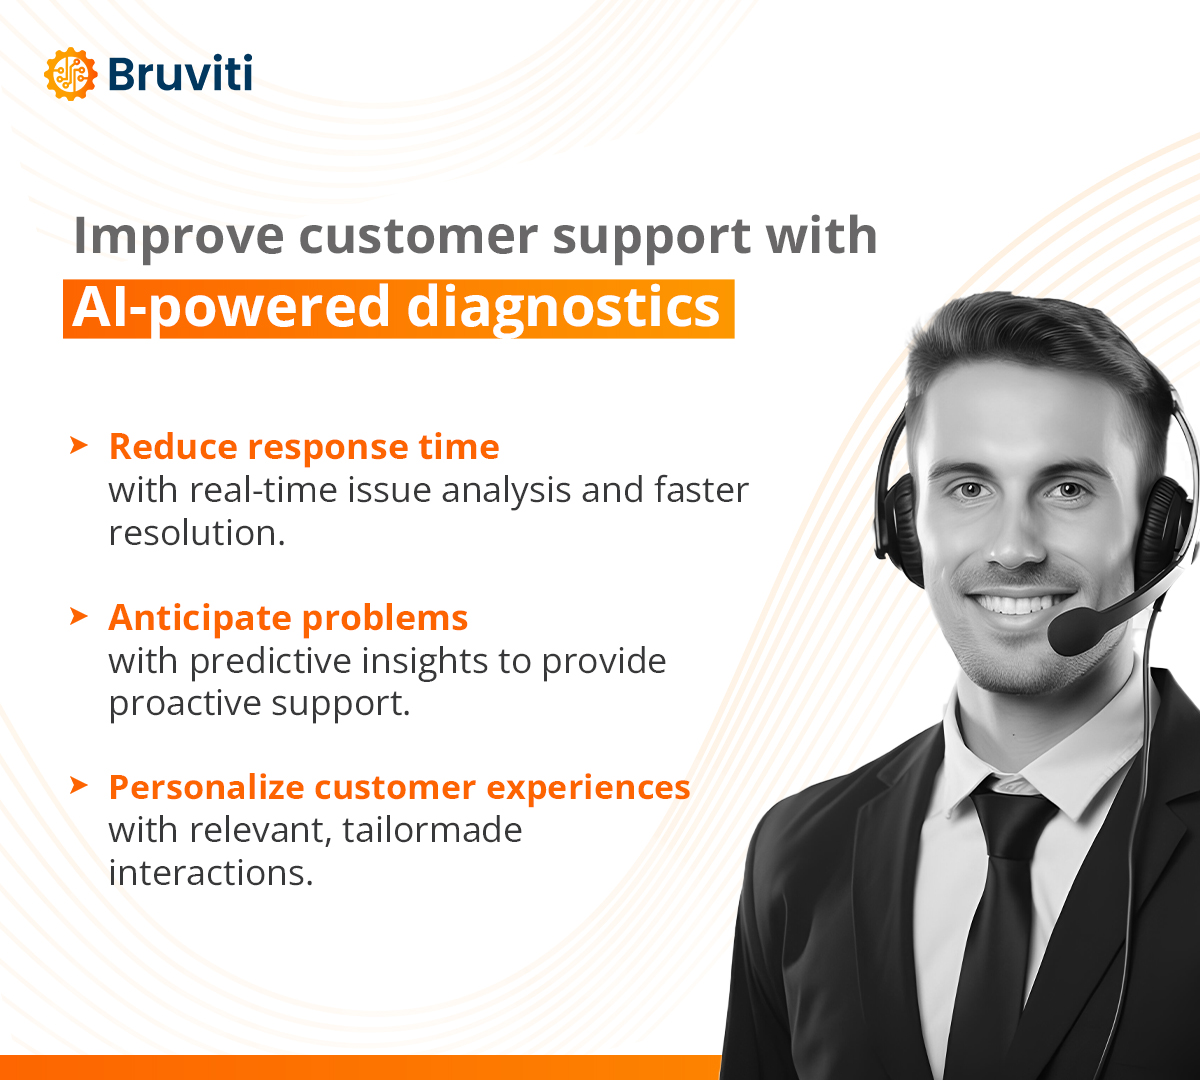 Data can be the answer to most questions! Empower your agents with Bruviti AI #rt #AI #cx #customerexcellence #contactcenter #agents #support #bruviti #insight